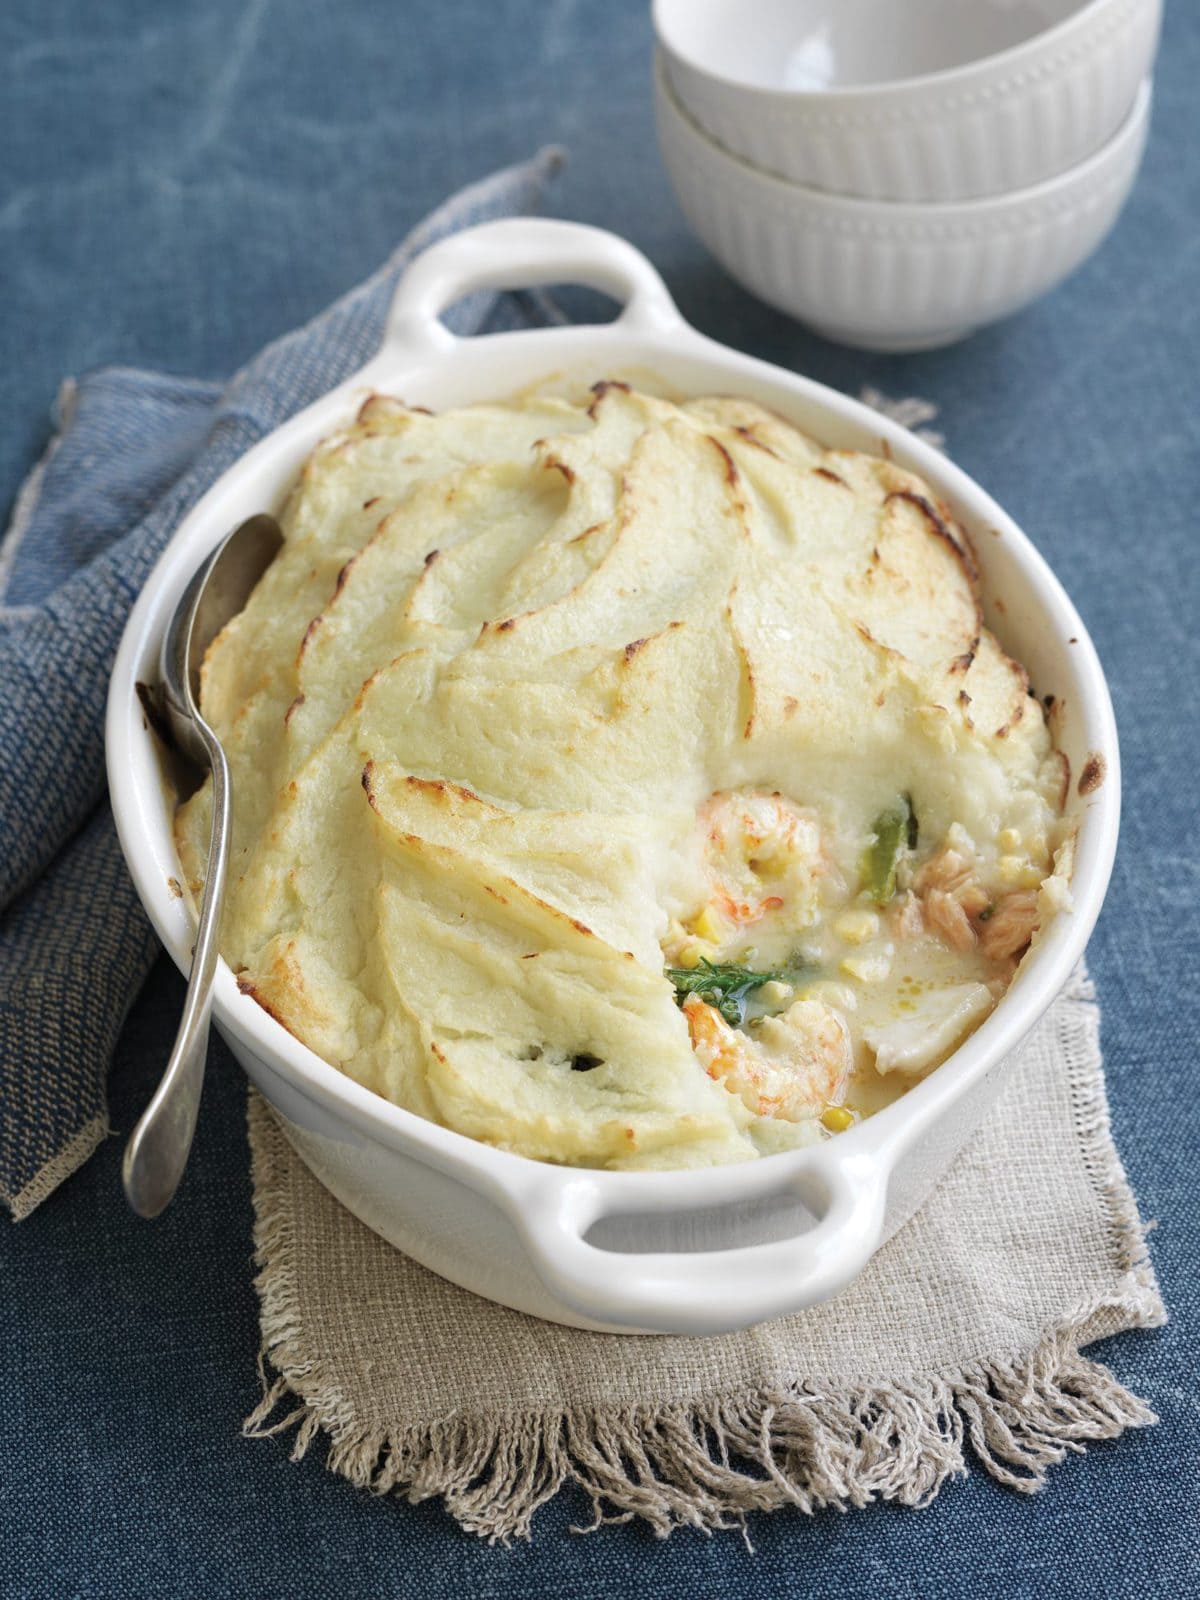 Fish pie with potato topping - Healthy Food Guide